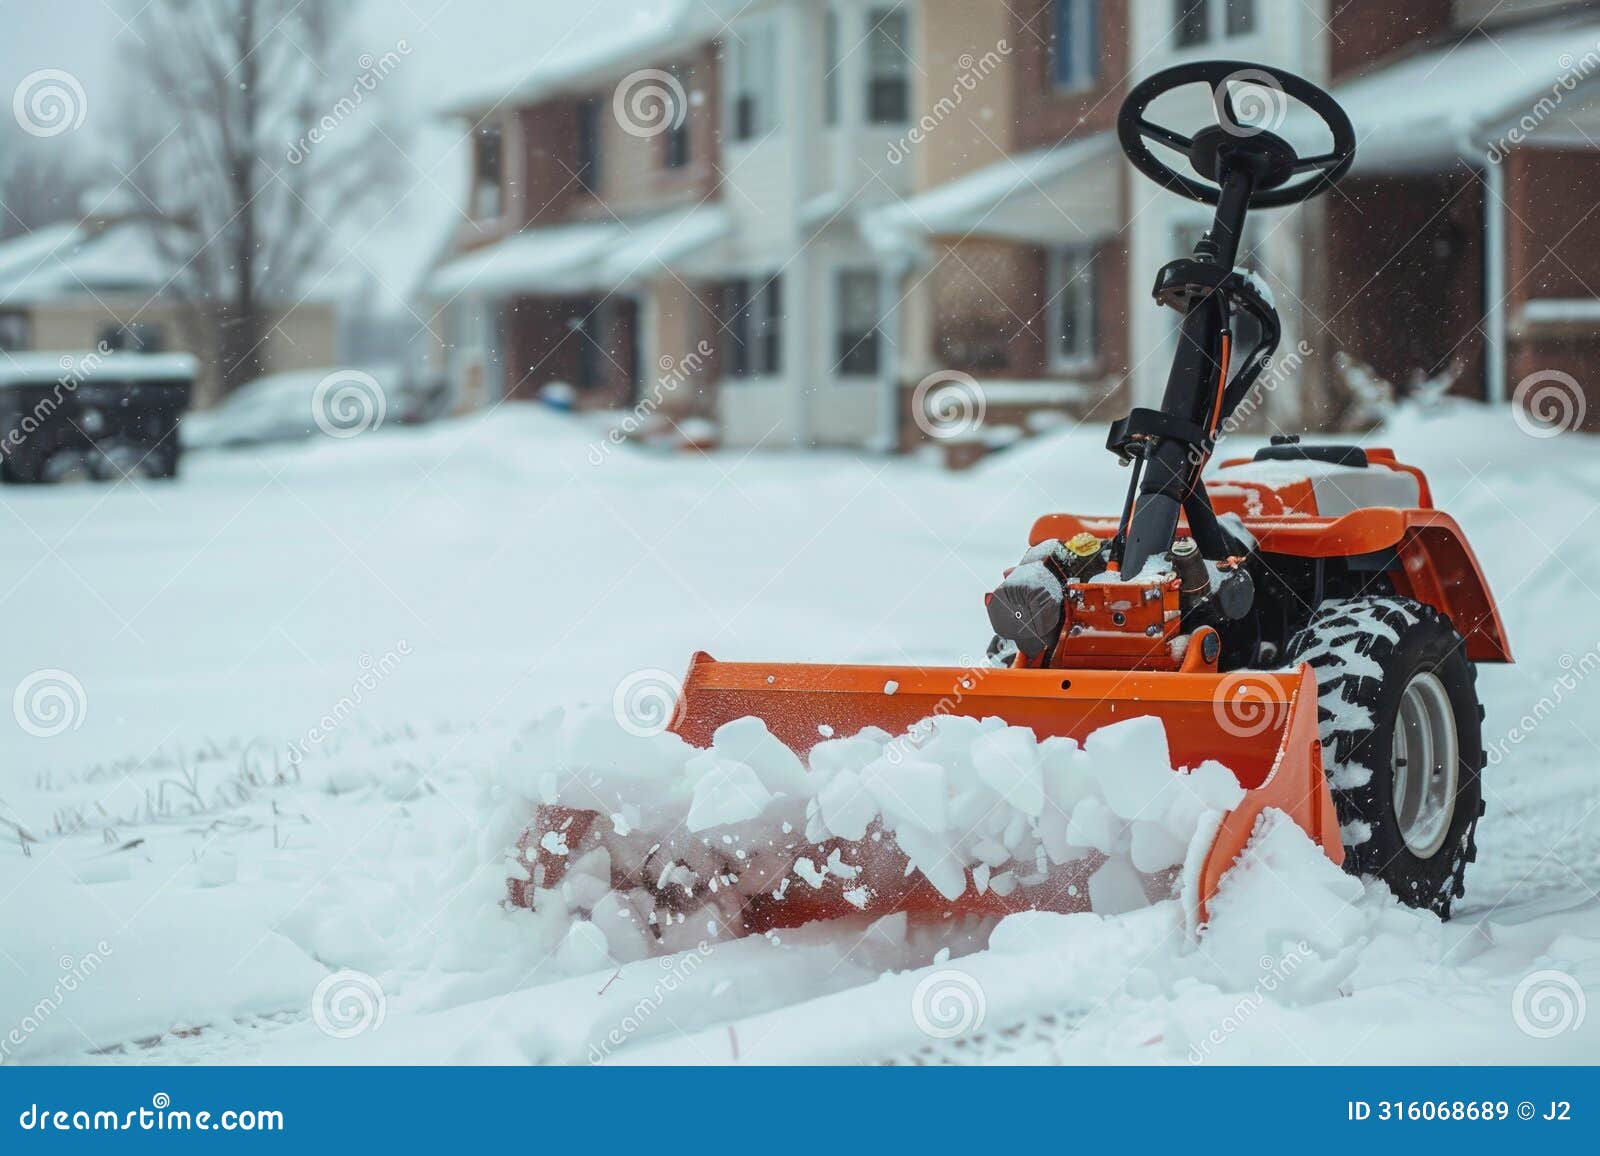 snow removal tractor clearing a path through a white winter landscape, a practical approach to heavy snowfall